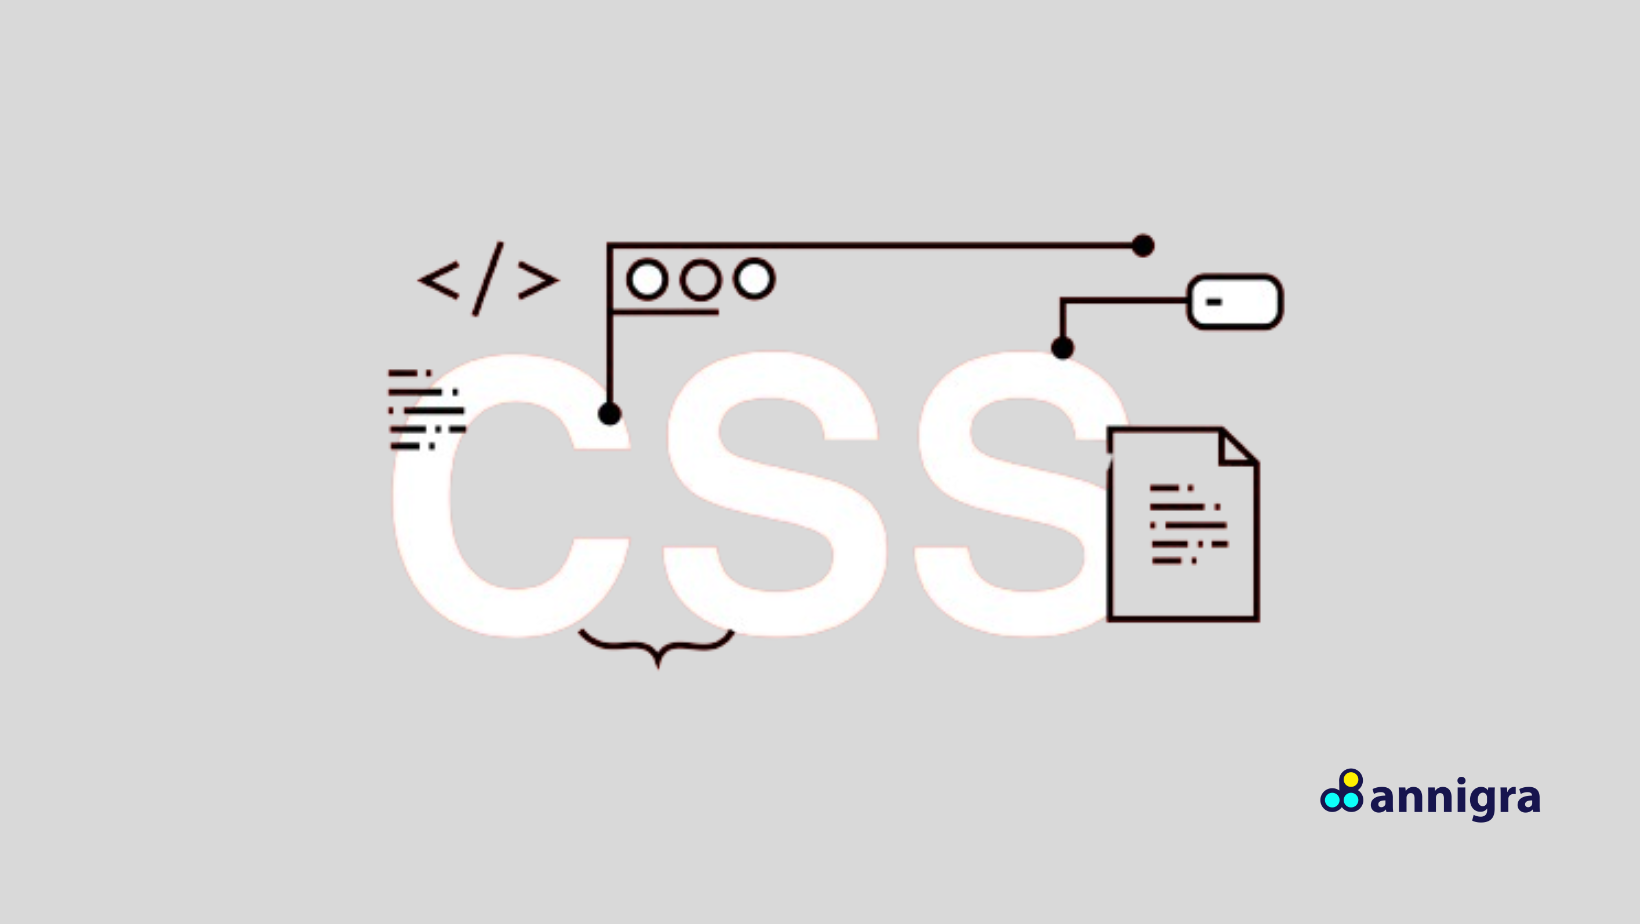 css layouts and positioning